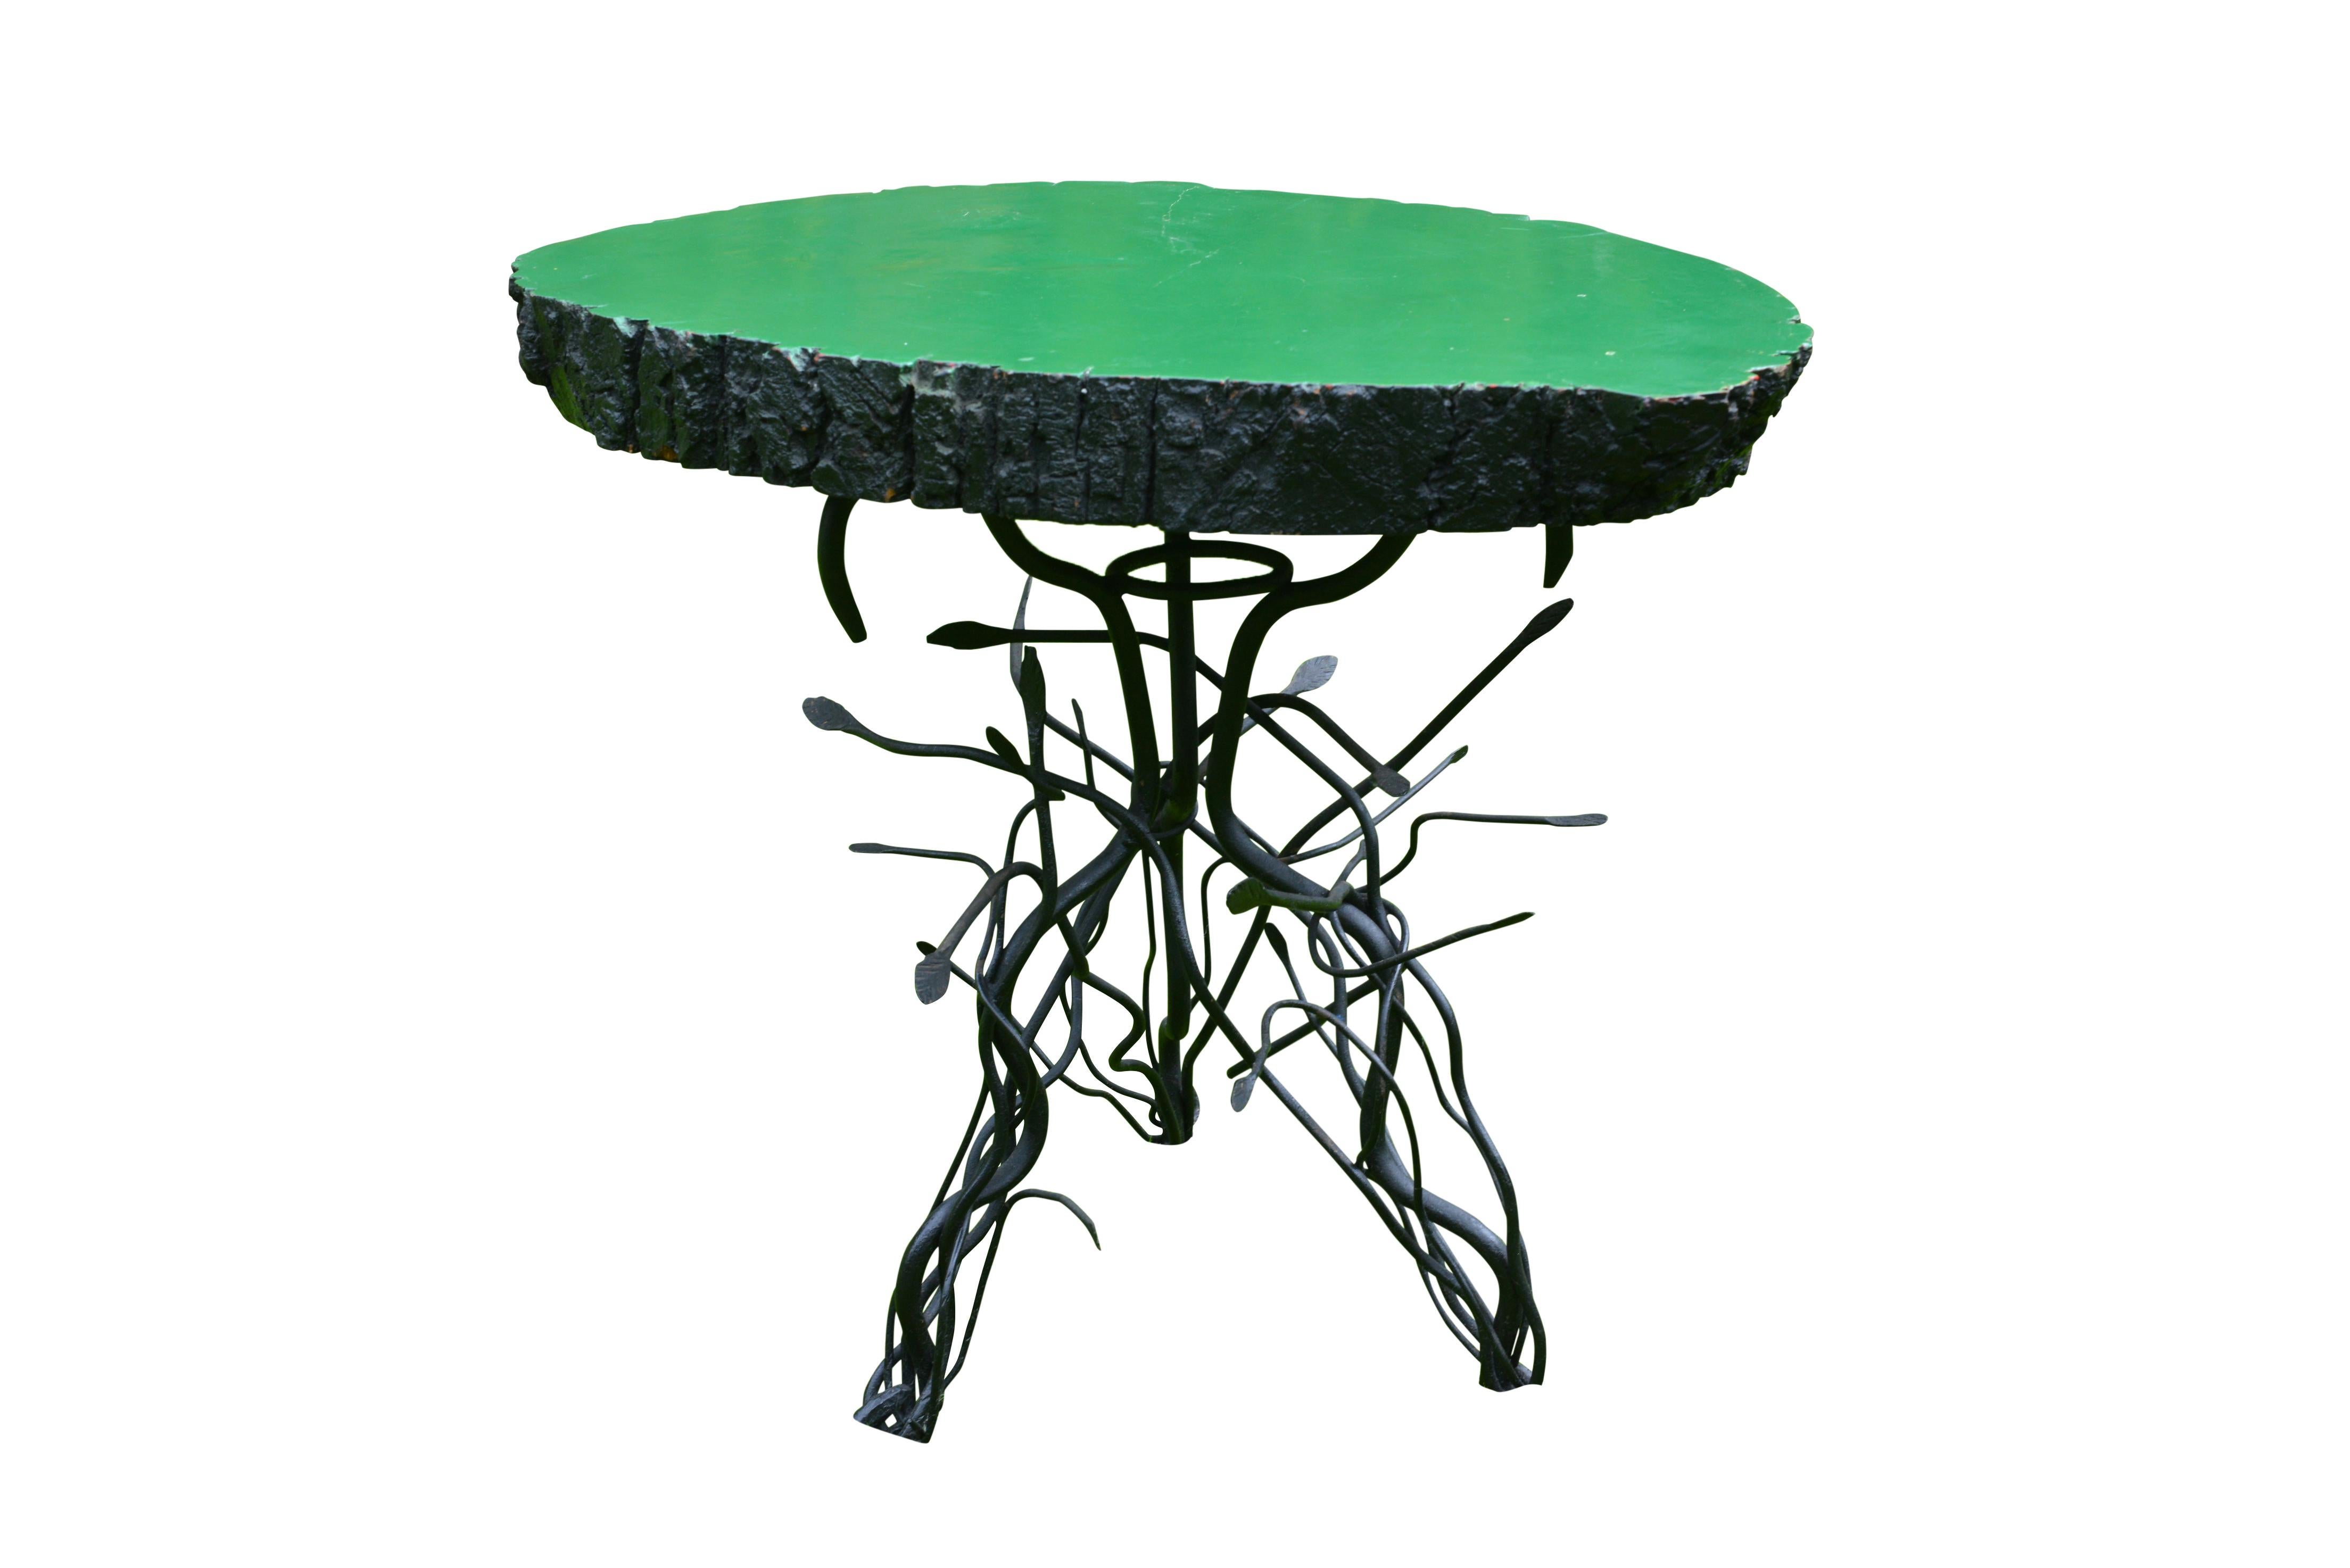 A quirky side table with Irish green lacquered tree-trunk top and twisted wire branches base.